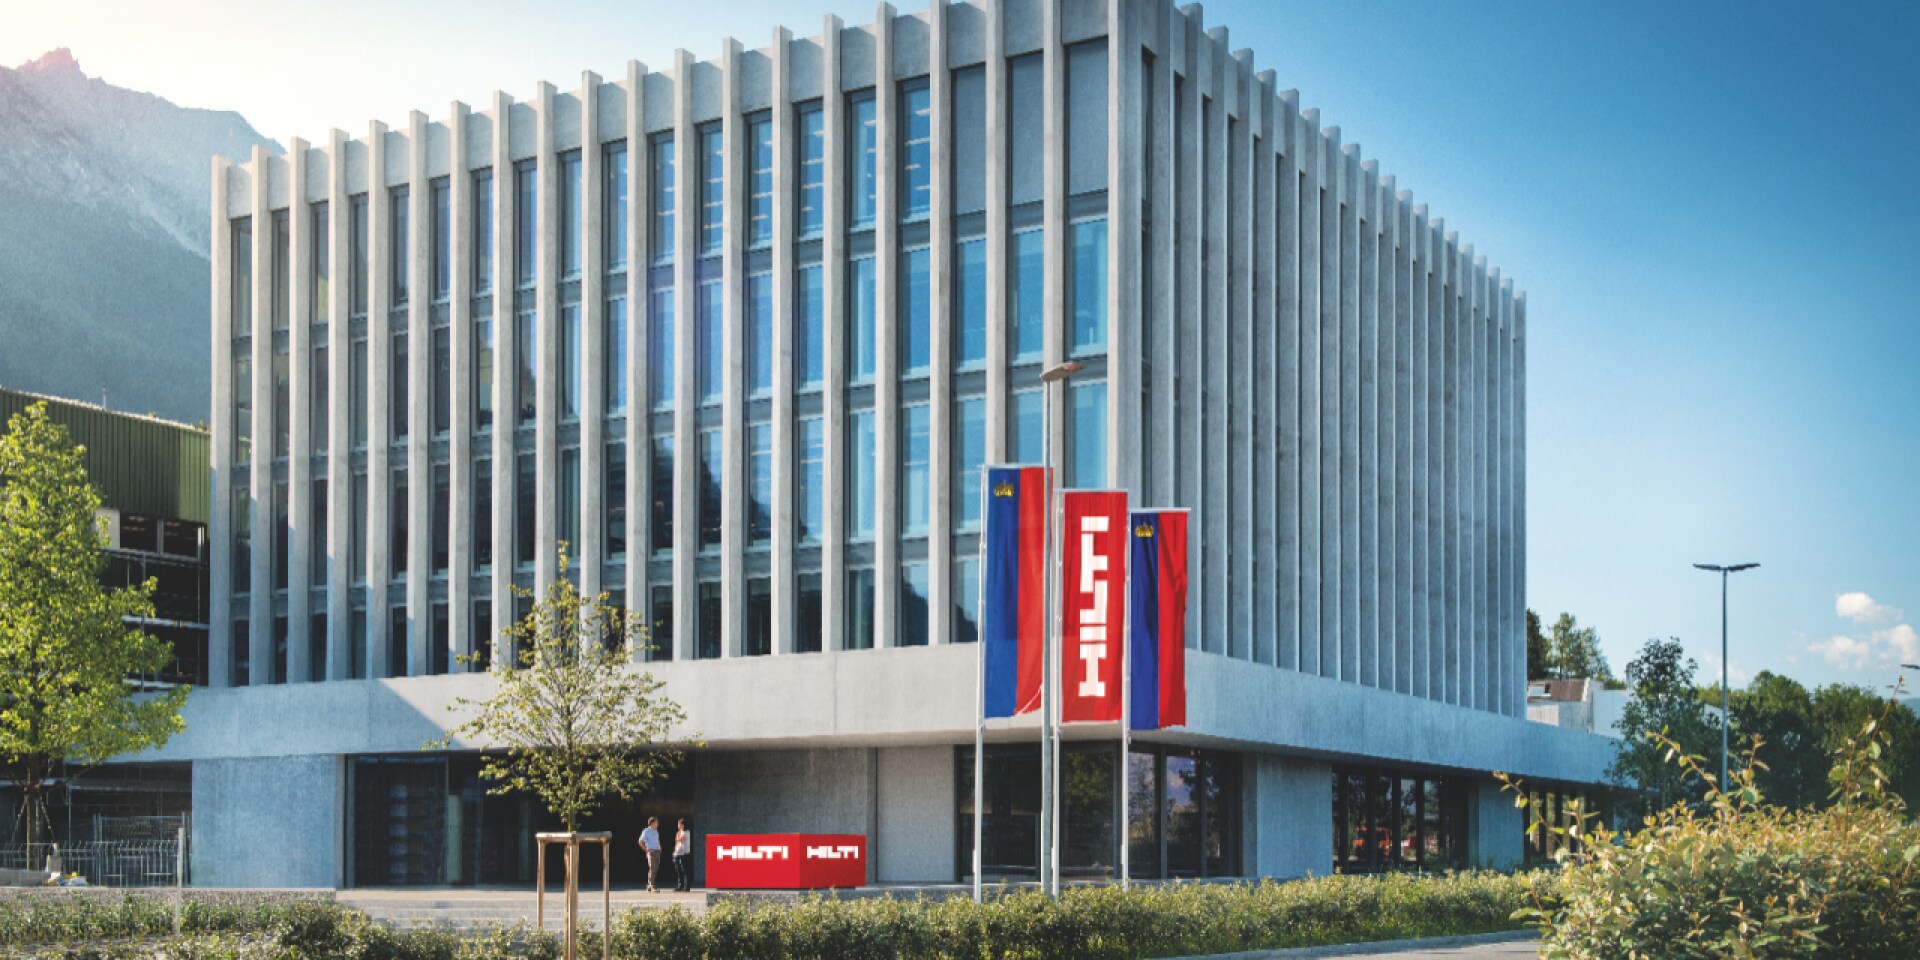 HILTI CONTINUES TO GROW